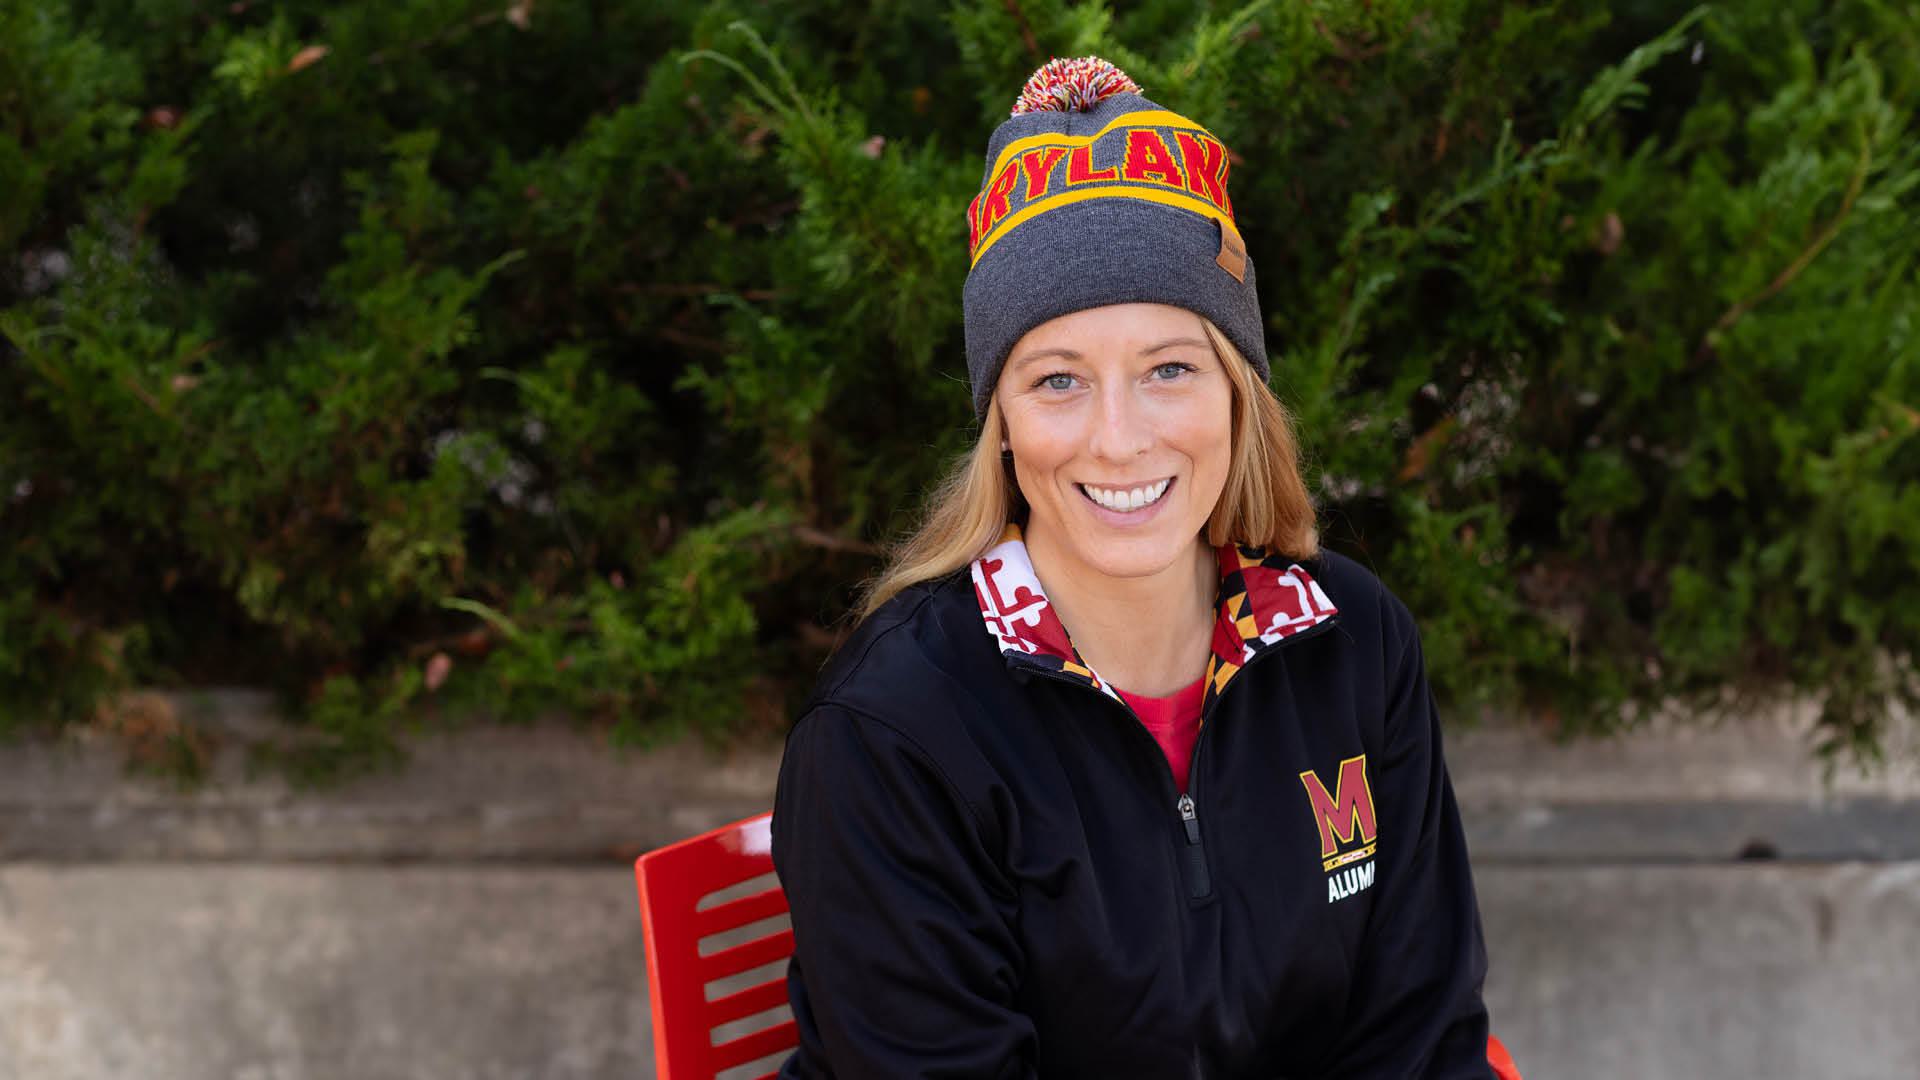 Kate Jowaisas wearing the Maryland winter beanie membership gift as well as the lifetime member pullover